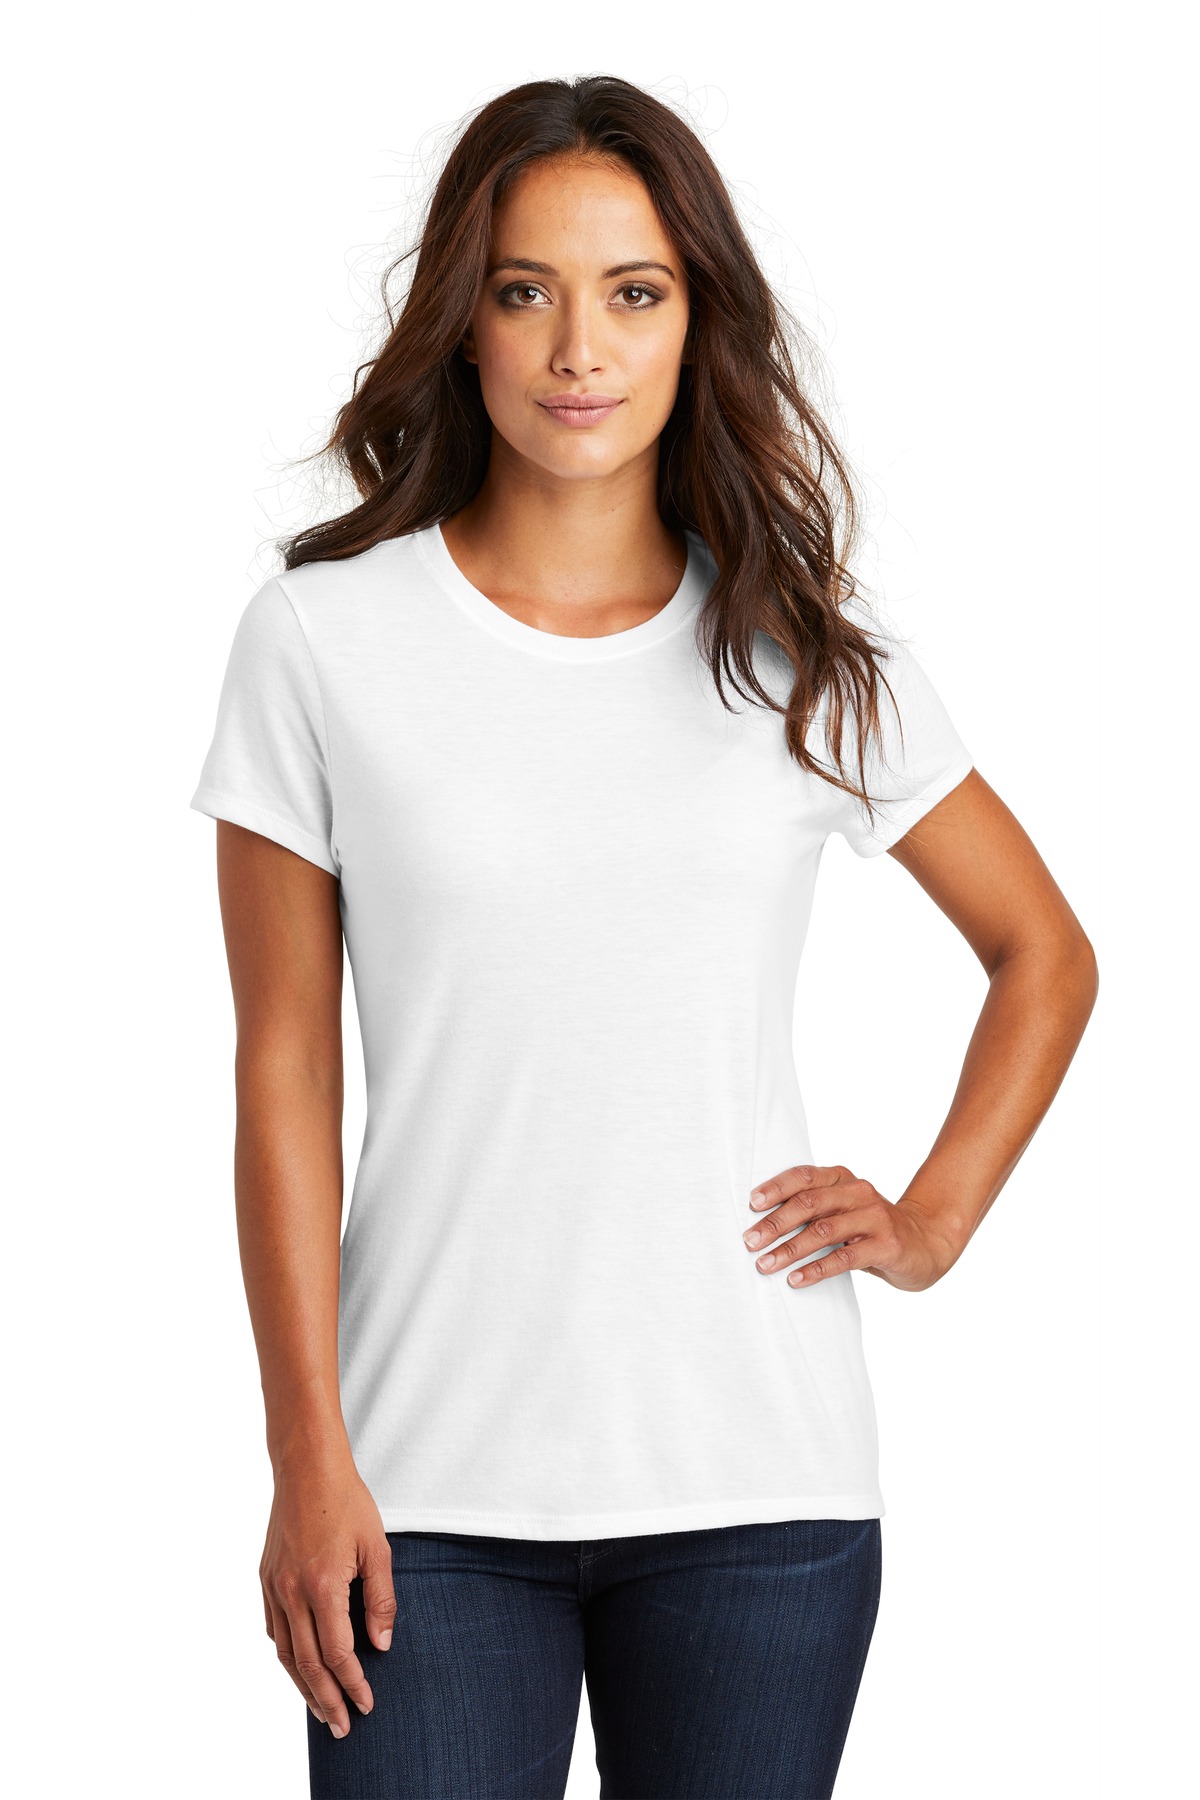 District Ladies Hospitality T-Shirts ® Womens Perfect Tri® Tee.-District